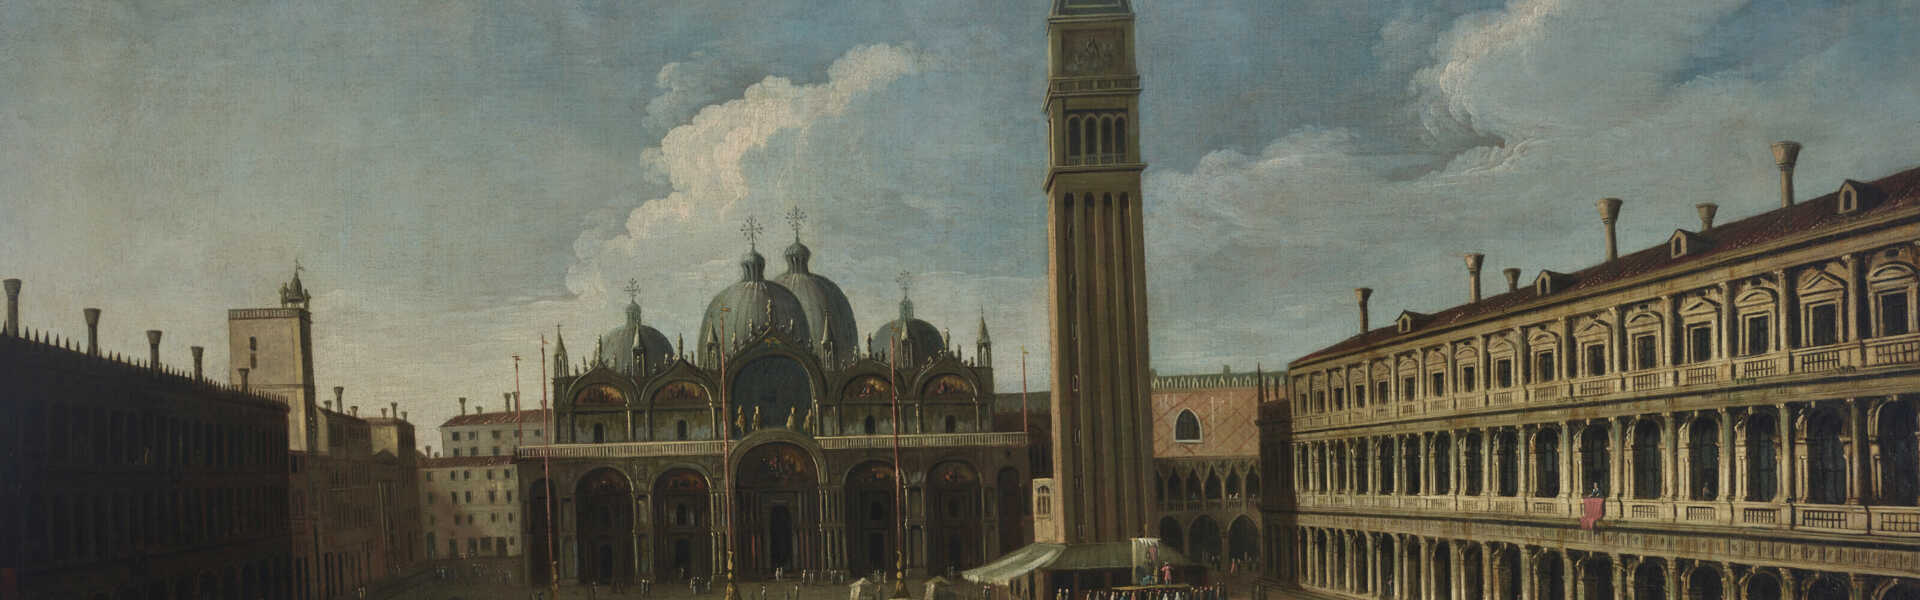 ATTRIBUTED TO APOLLONIO DOMENICHINI, FORMERLY KNOWN AS THE MASTER OF THE LANGMATT FOUNDATION VIEWS (ACTIVE VENICE CIRCA 1740-1770)